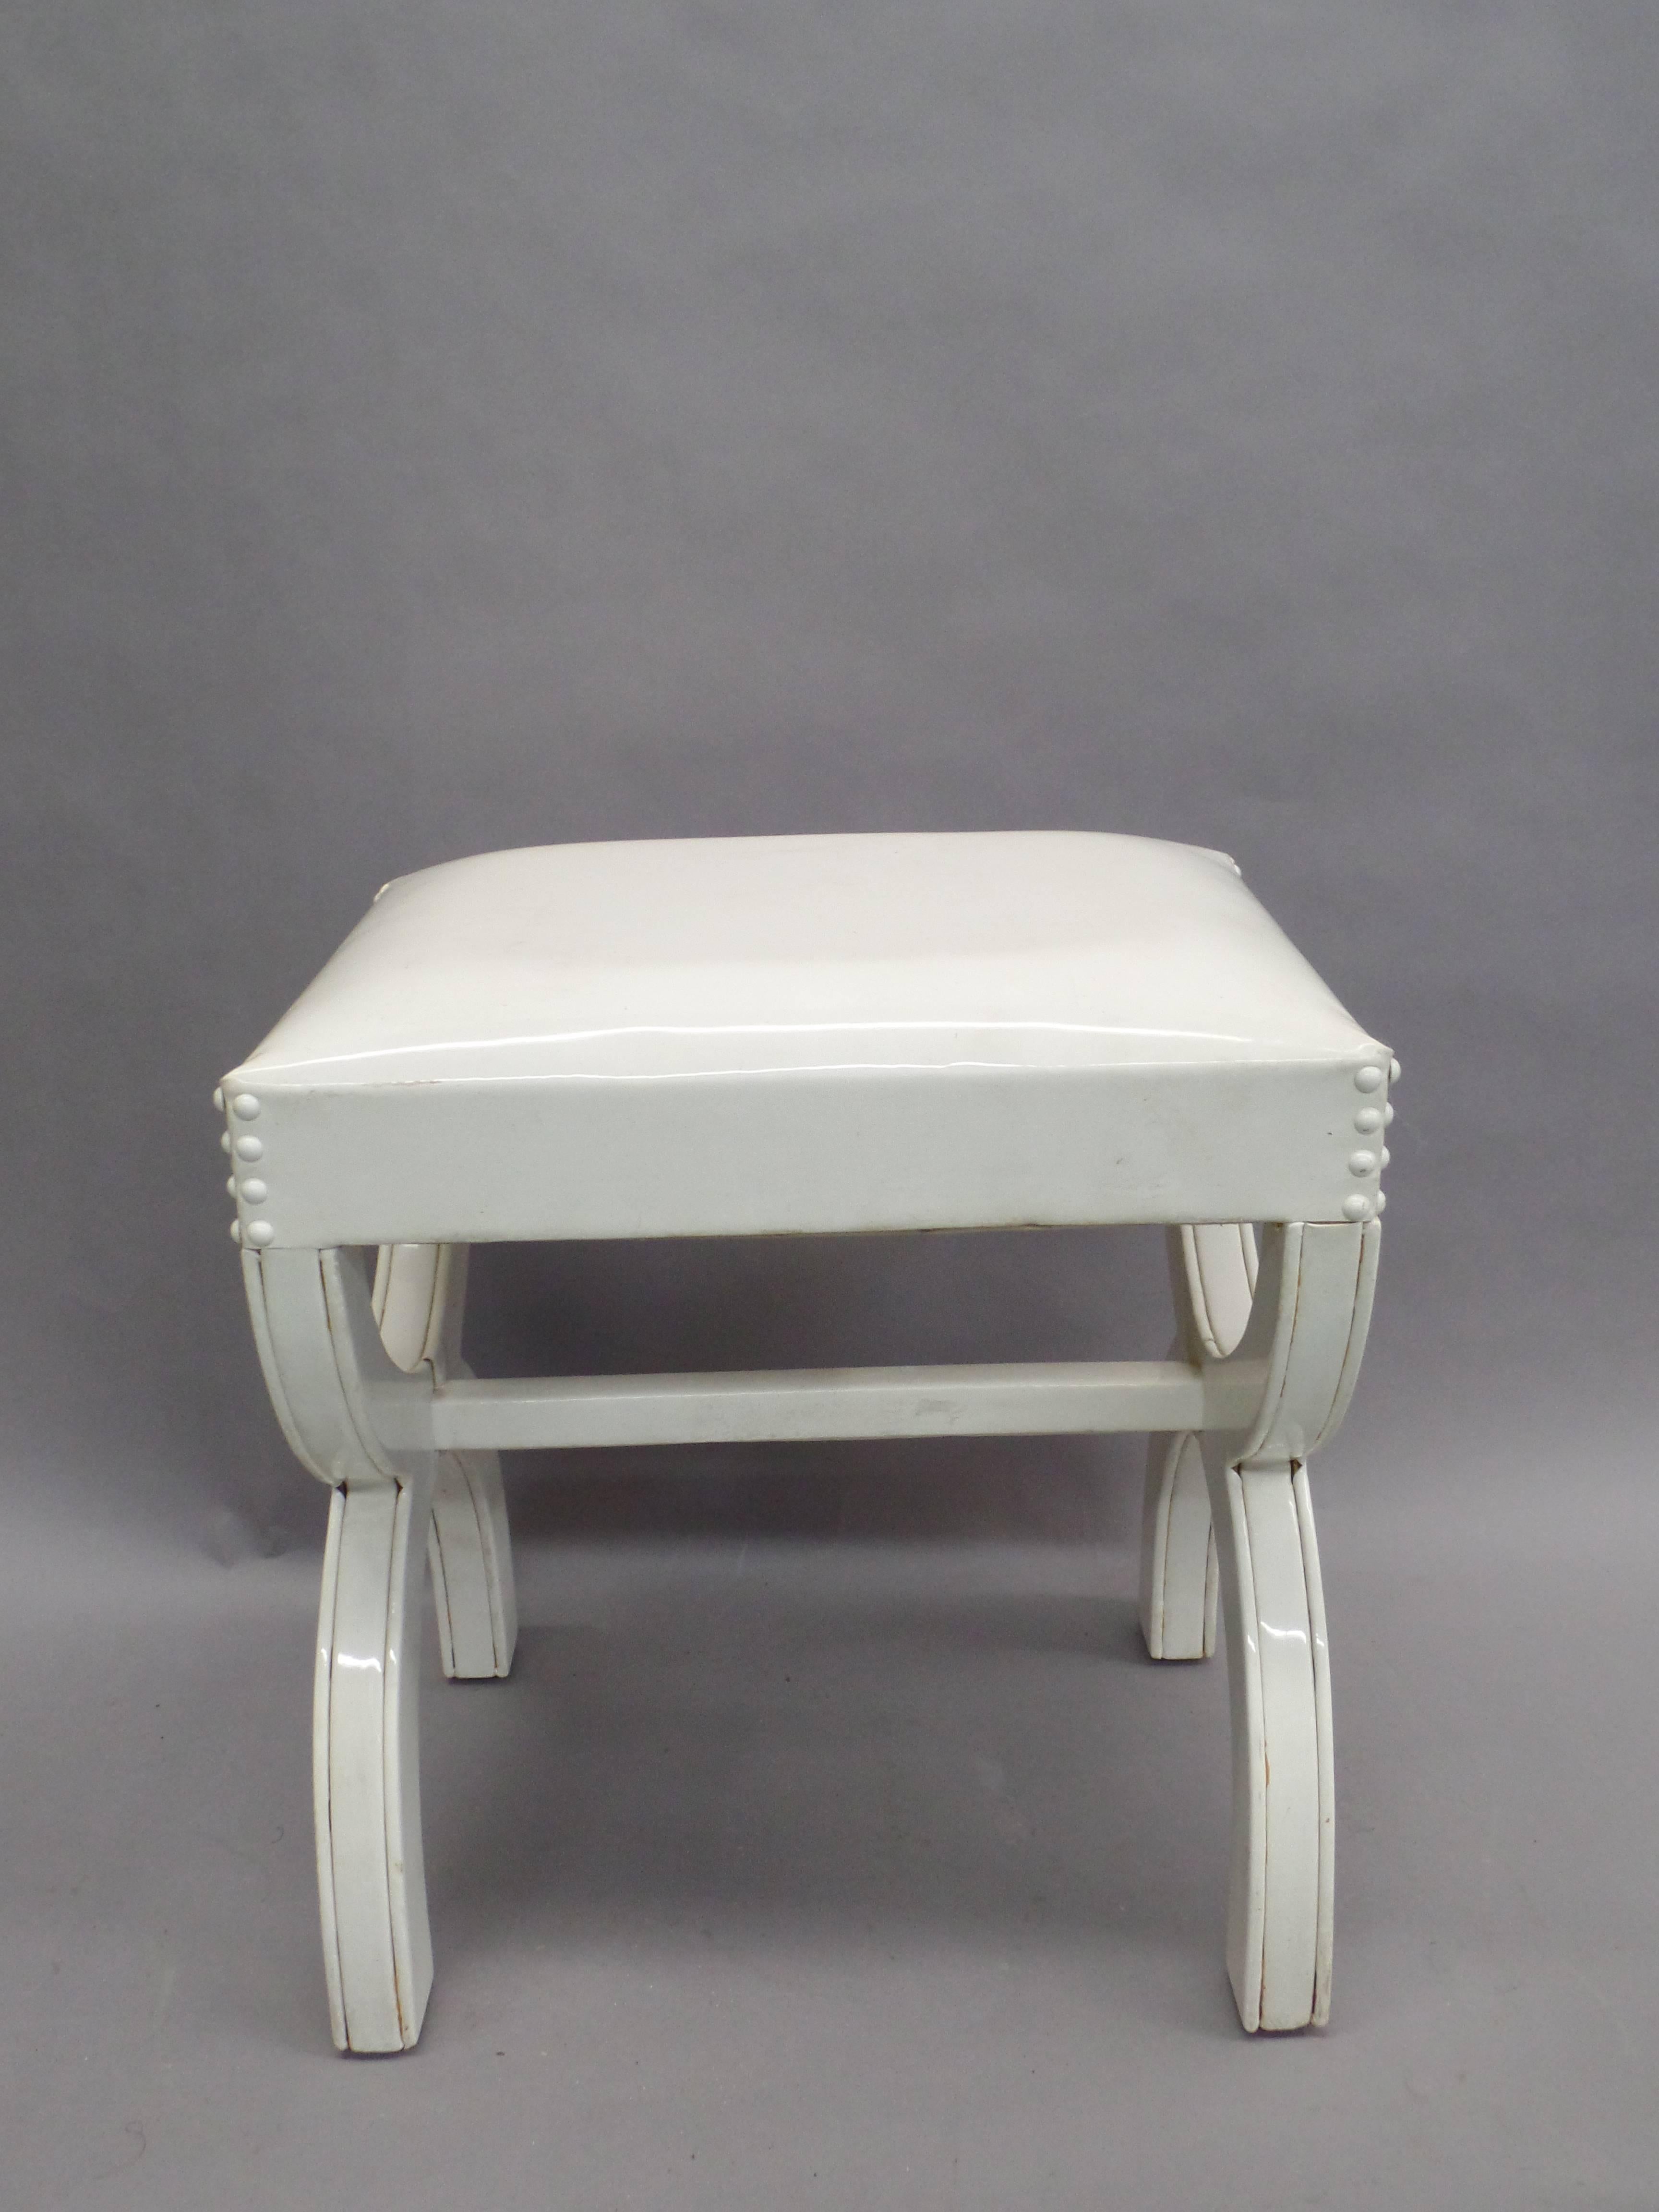 French Modern Neoclassical Bench in White Simi-Leather in style of Andre Arbus In Good Condition For Sale In New York, NY